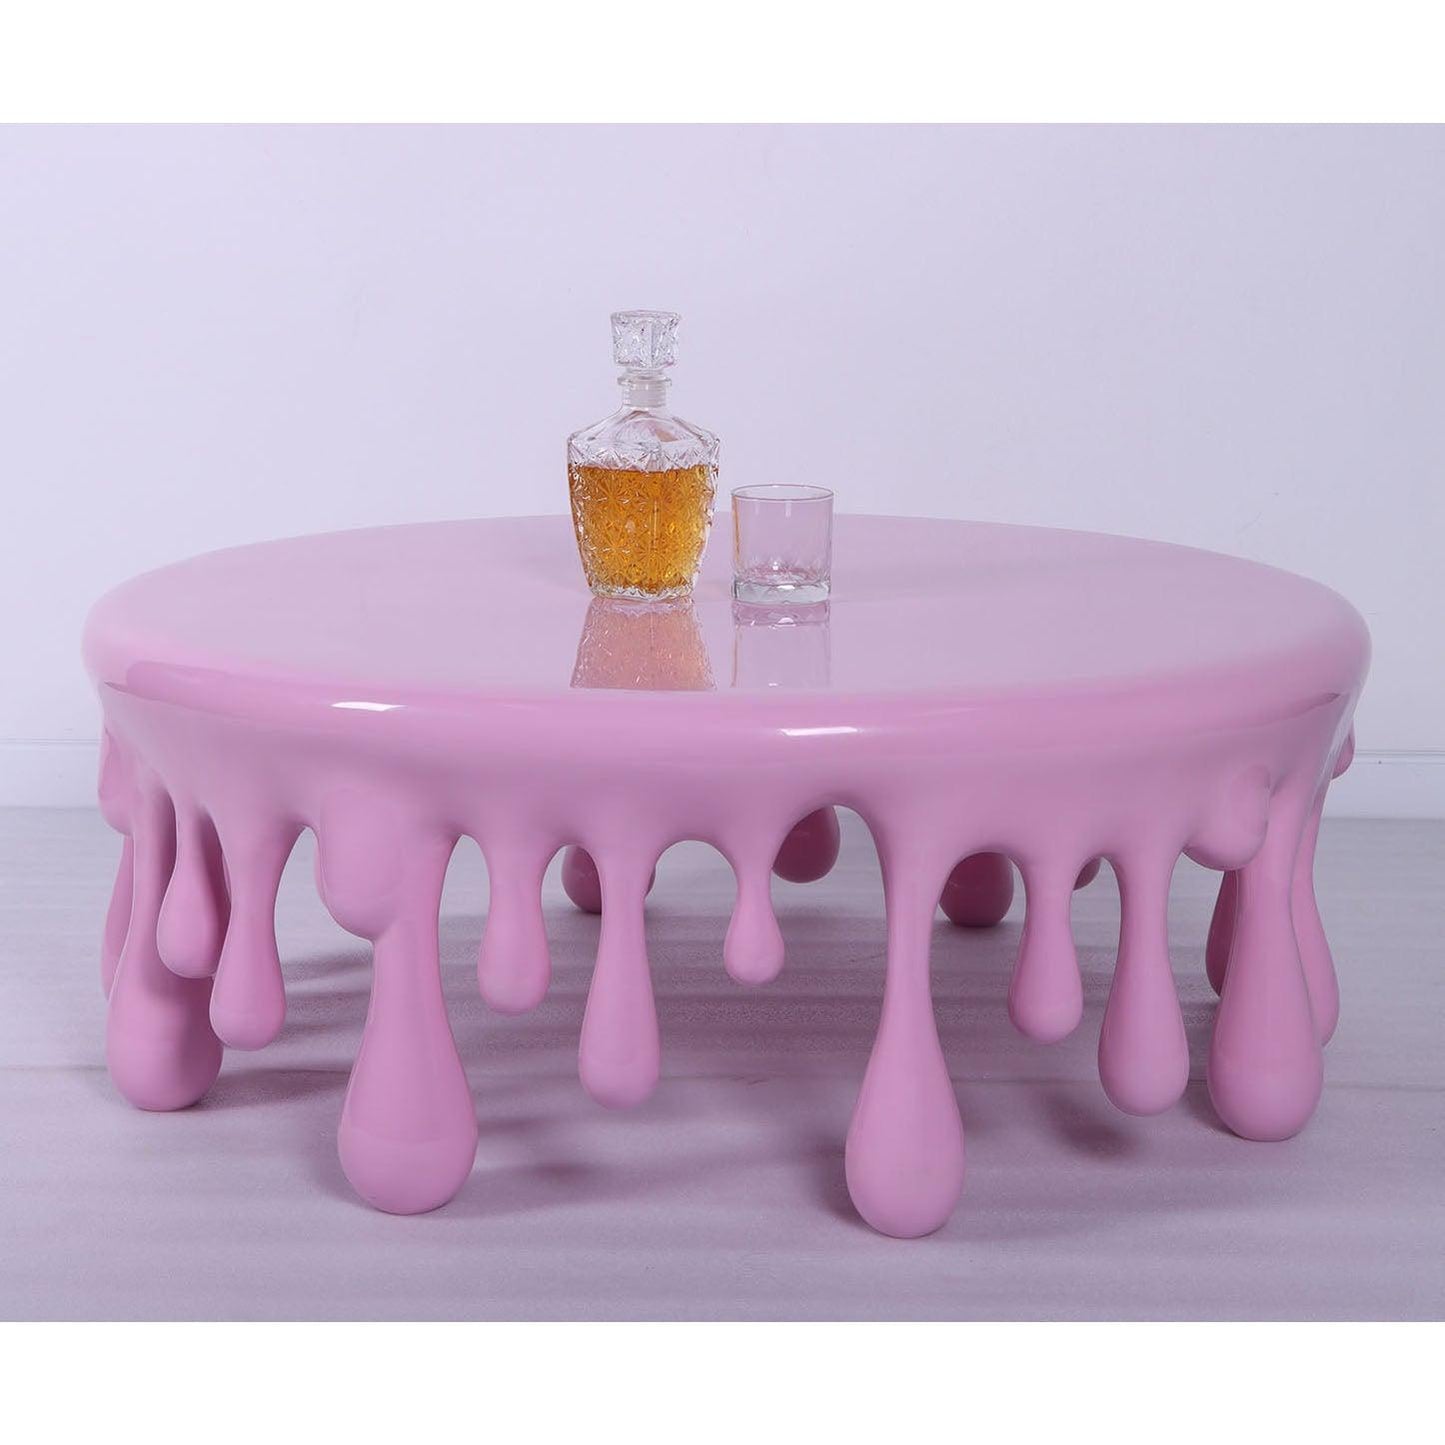 Melting Drip Round Table Statue